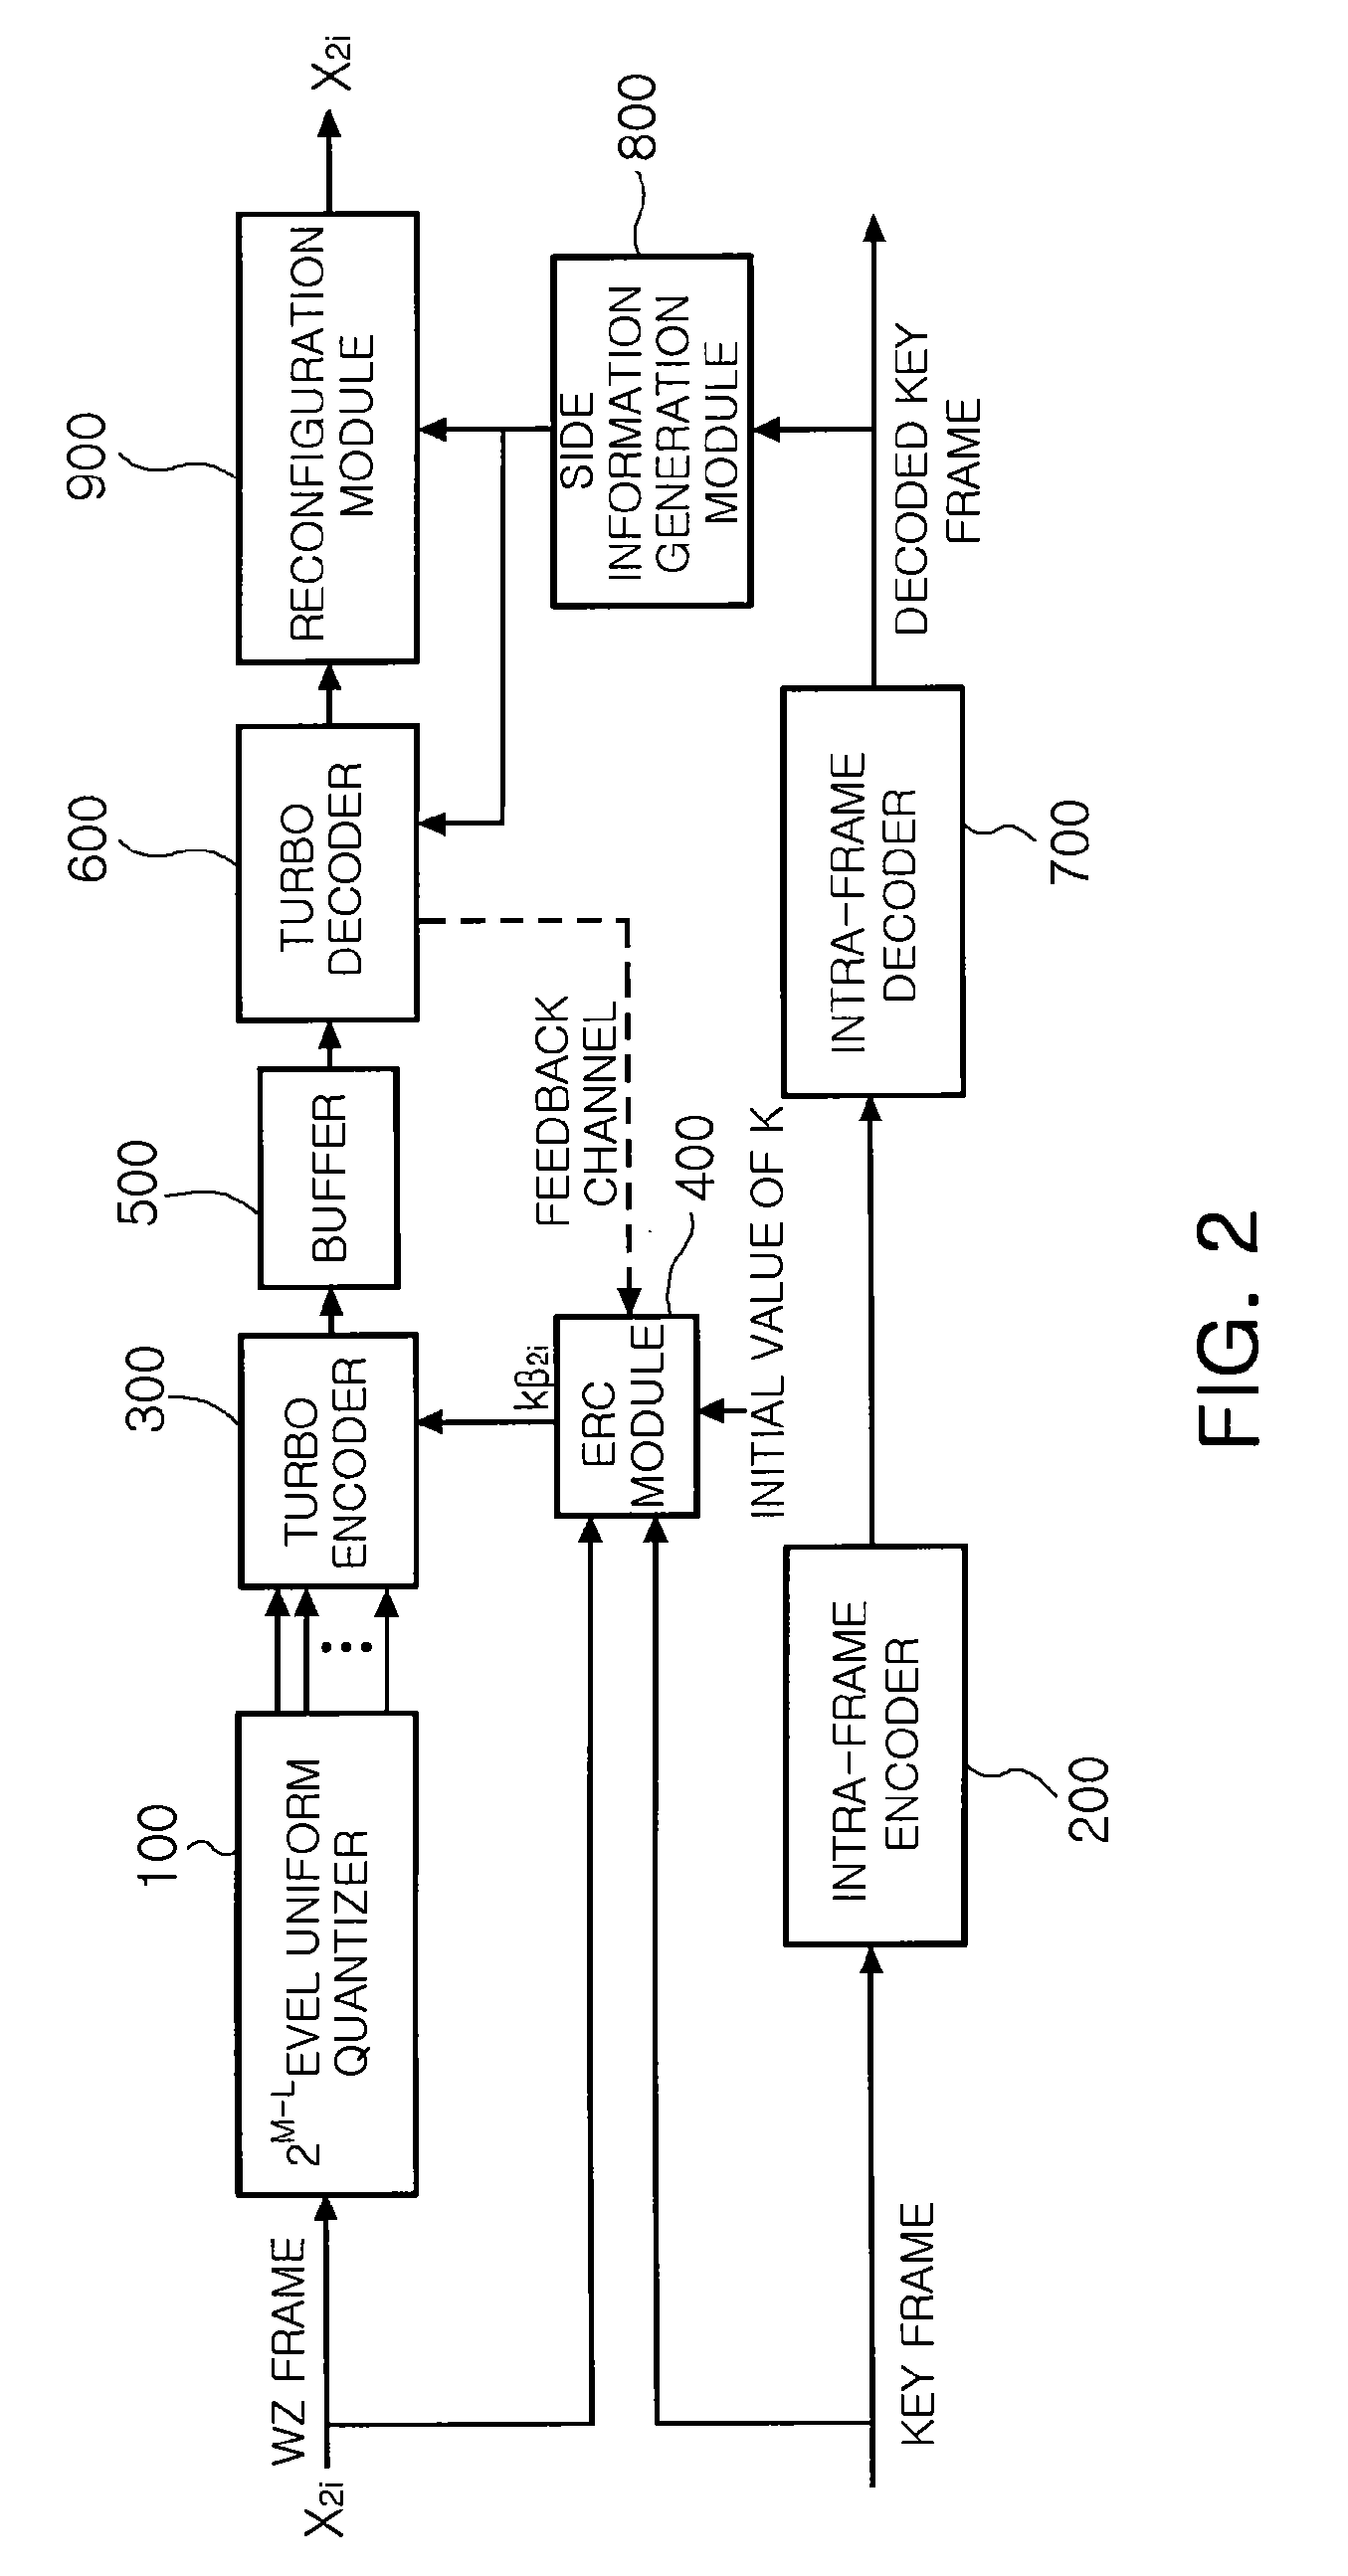 Distributed video coding apparatus and method capable of controlling encoding rate